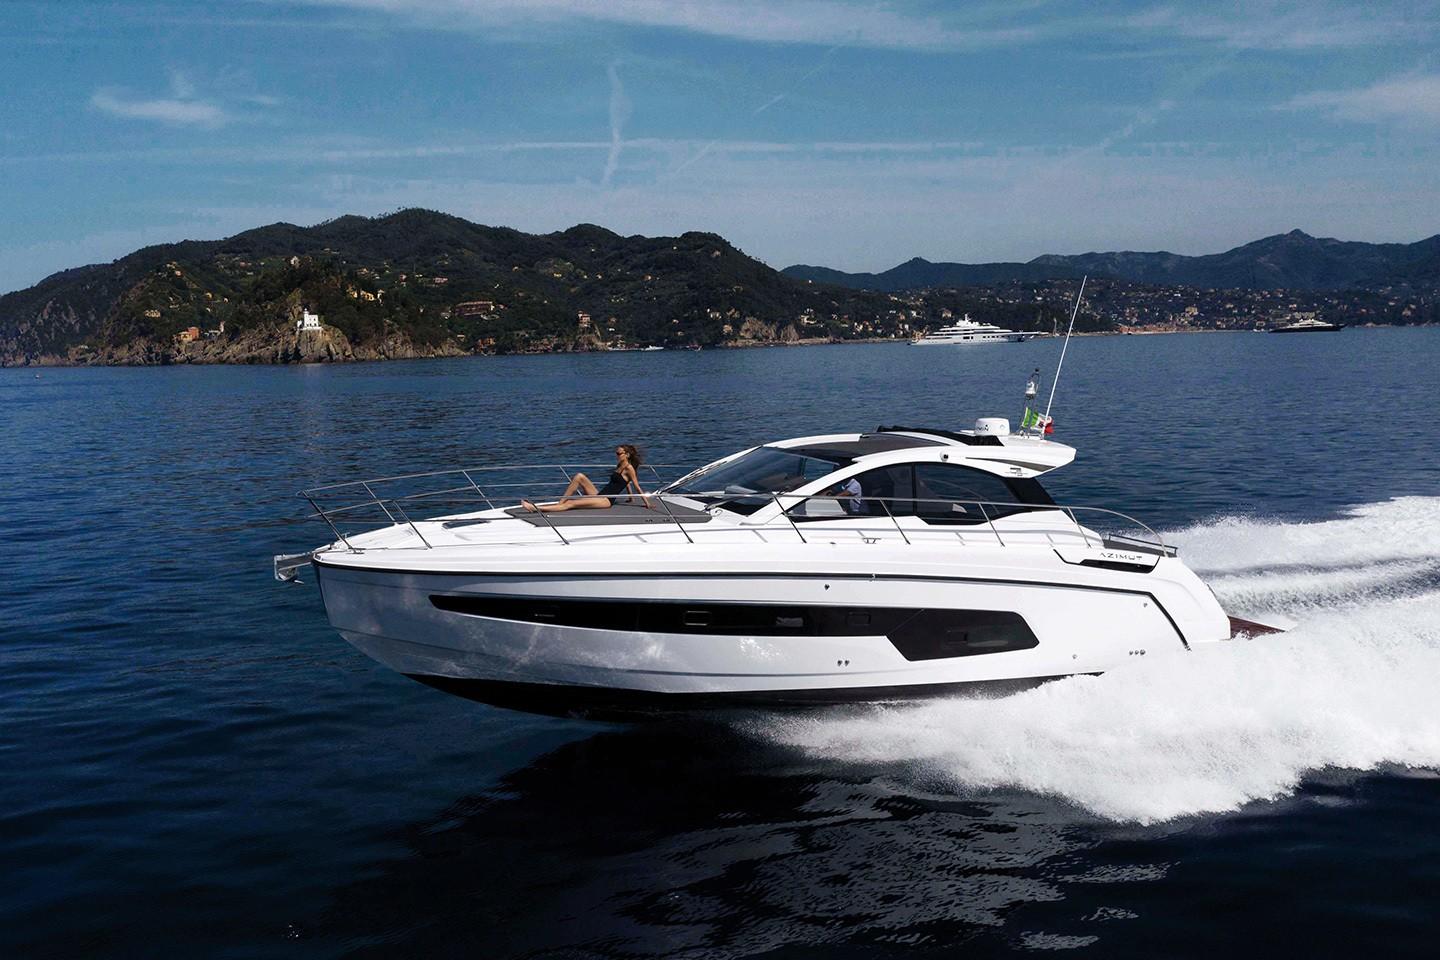 Yachts For Sale Sys Yacht Sales